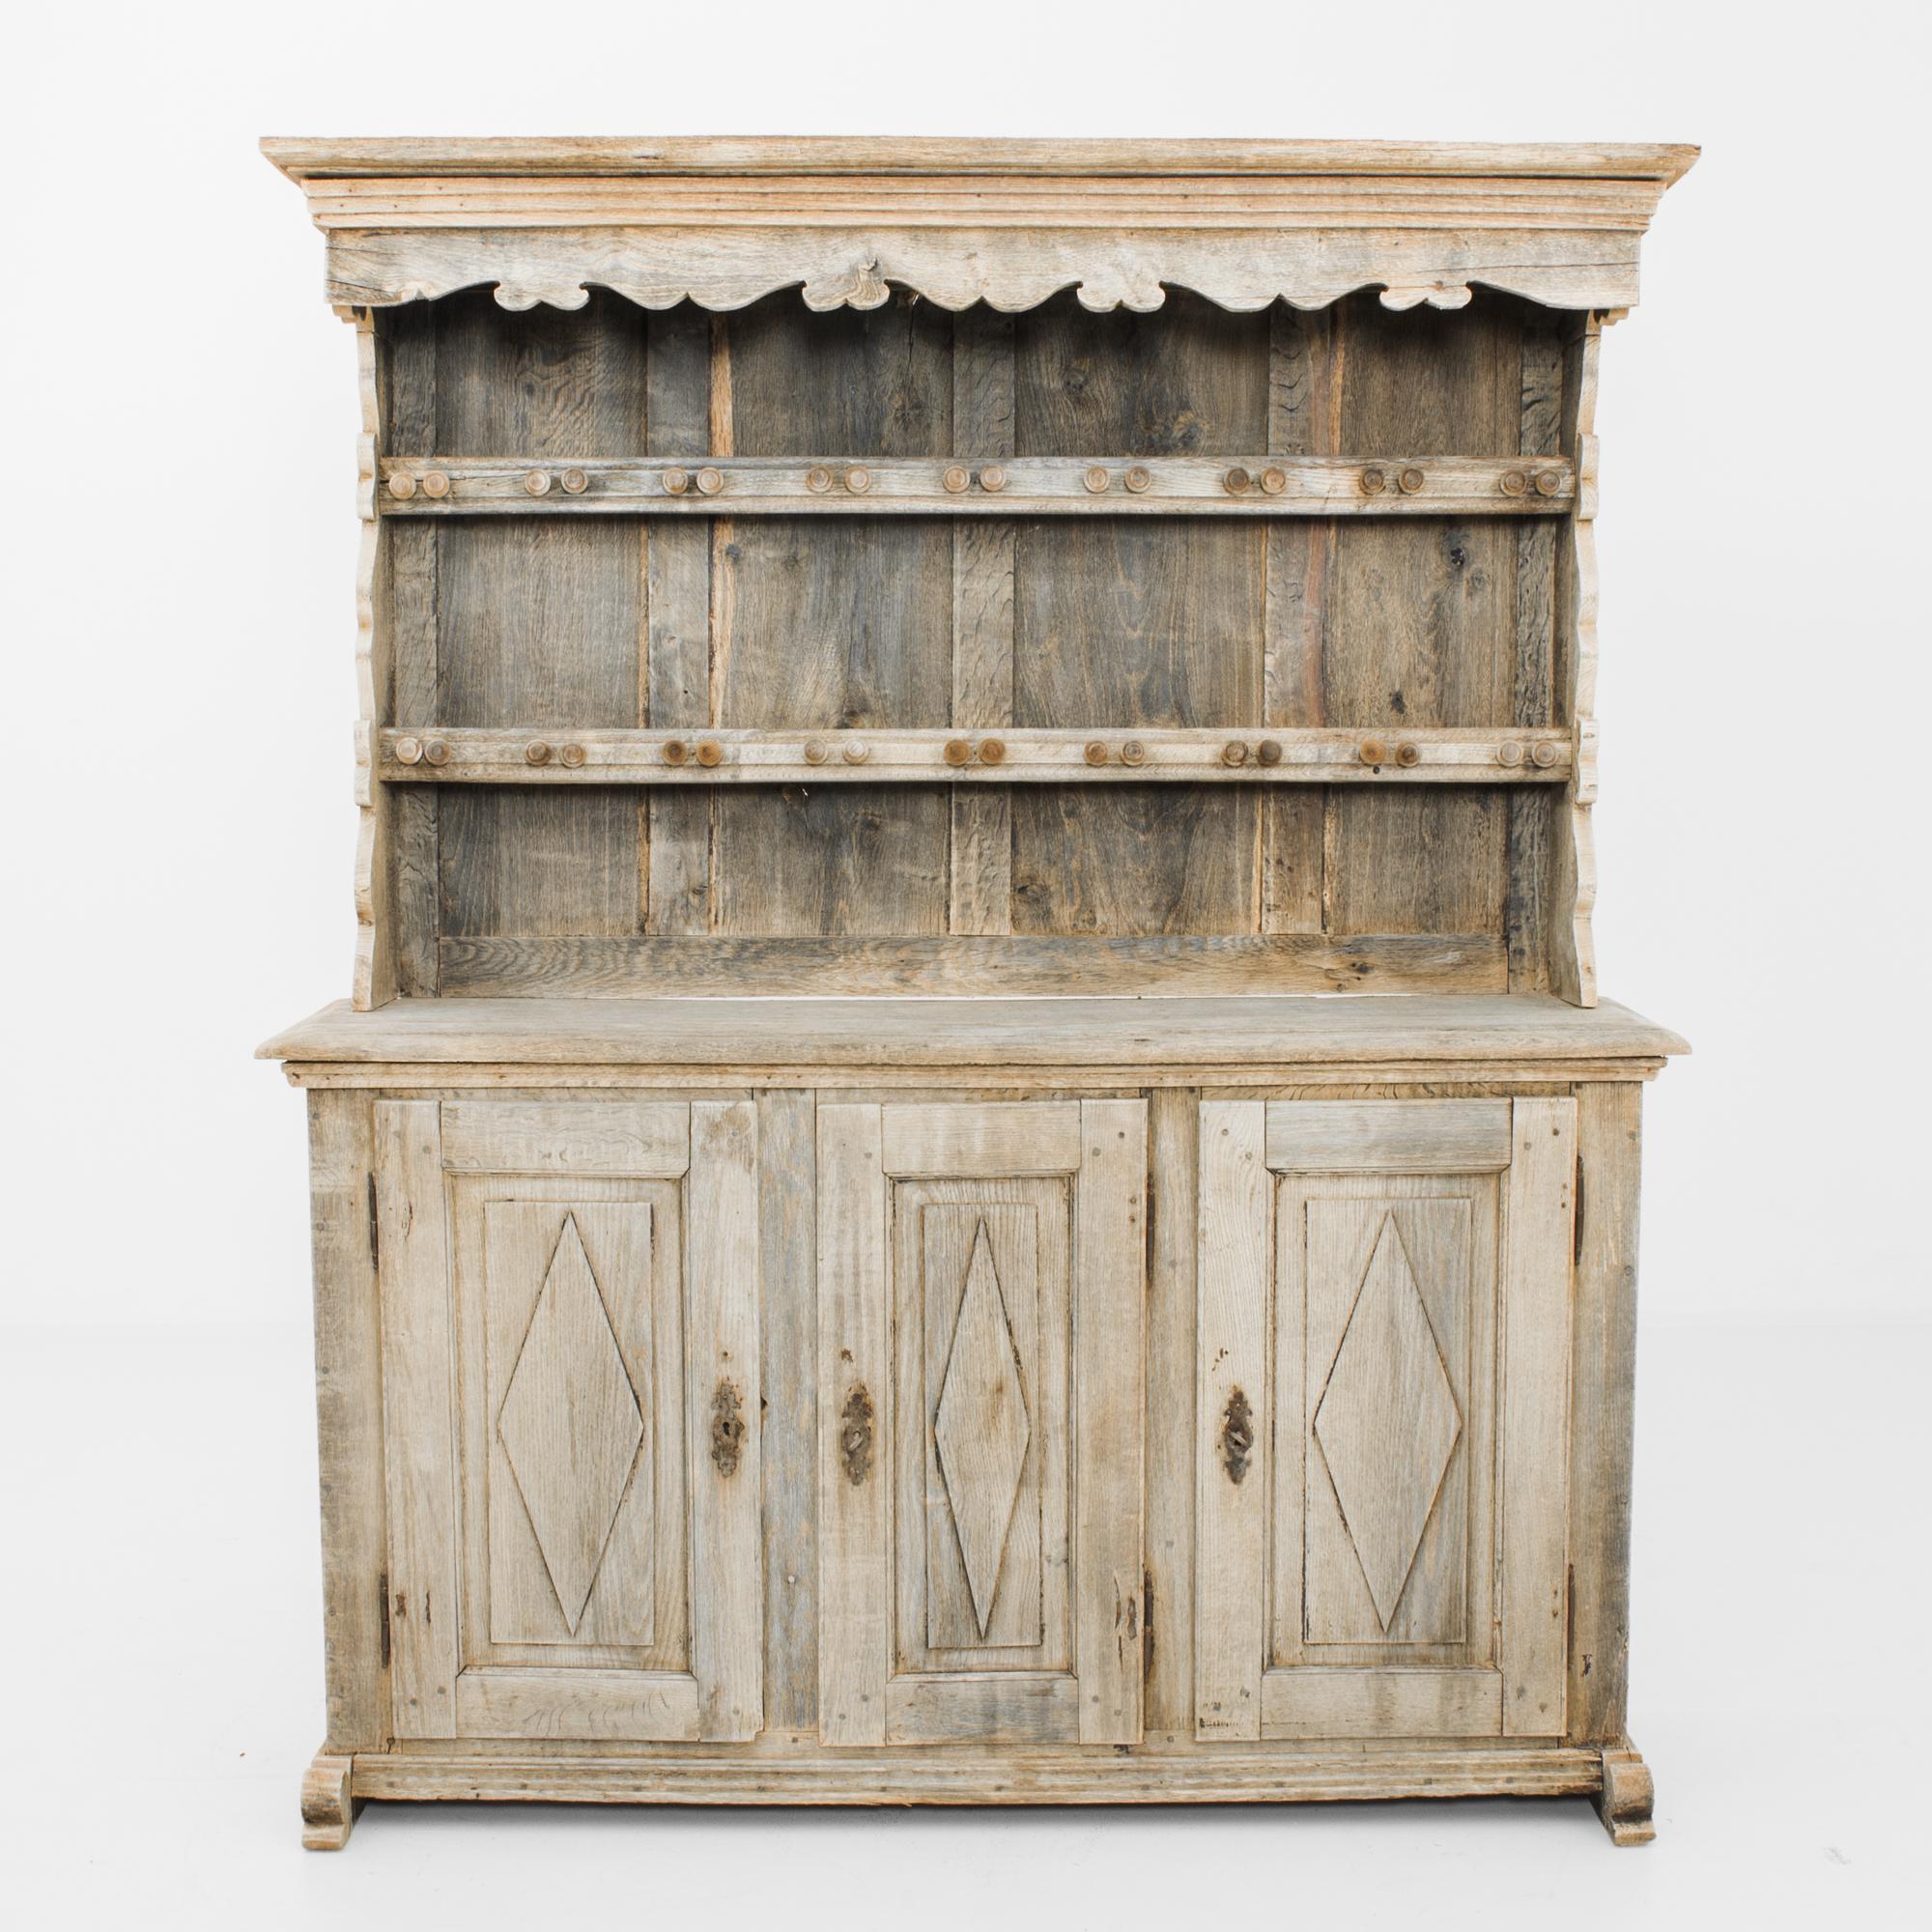 An oak dresser from 1880s France with a charming country aesthetic. A carved canopy frames the upper section, equipped with rails of round wooden knobs for hanging hang mugs, ornaments or bundles of herbs. Carved diamonds on the panelling of the